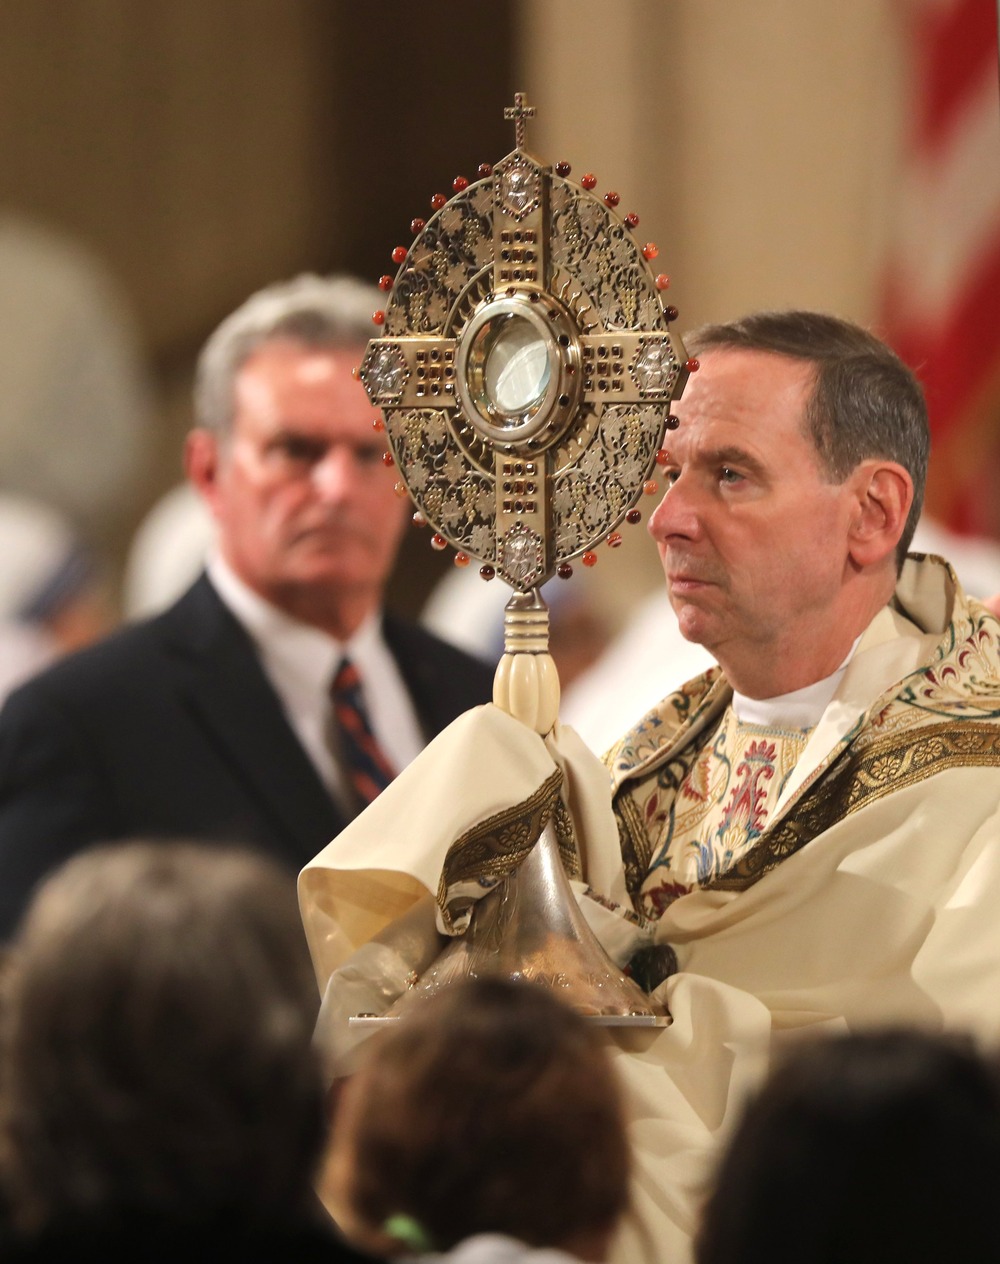 Bishop, vested, exposes Eucharistic Host in monstrance. 